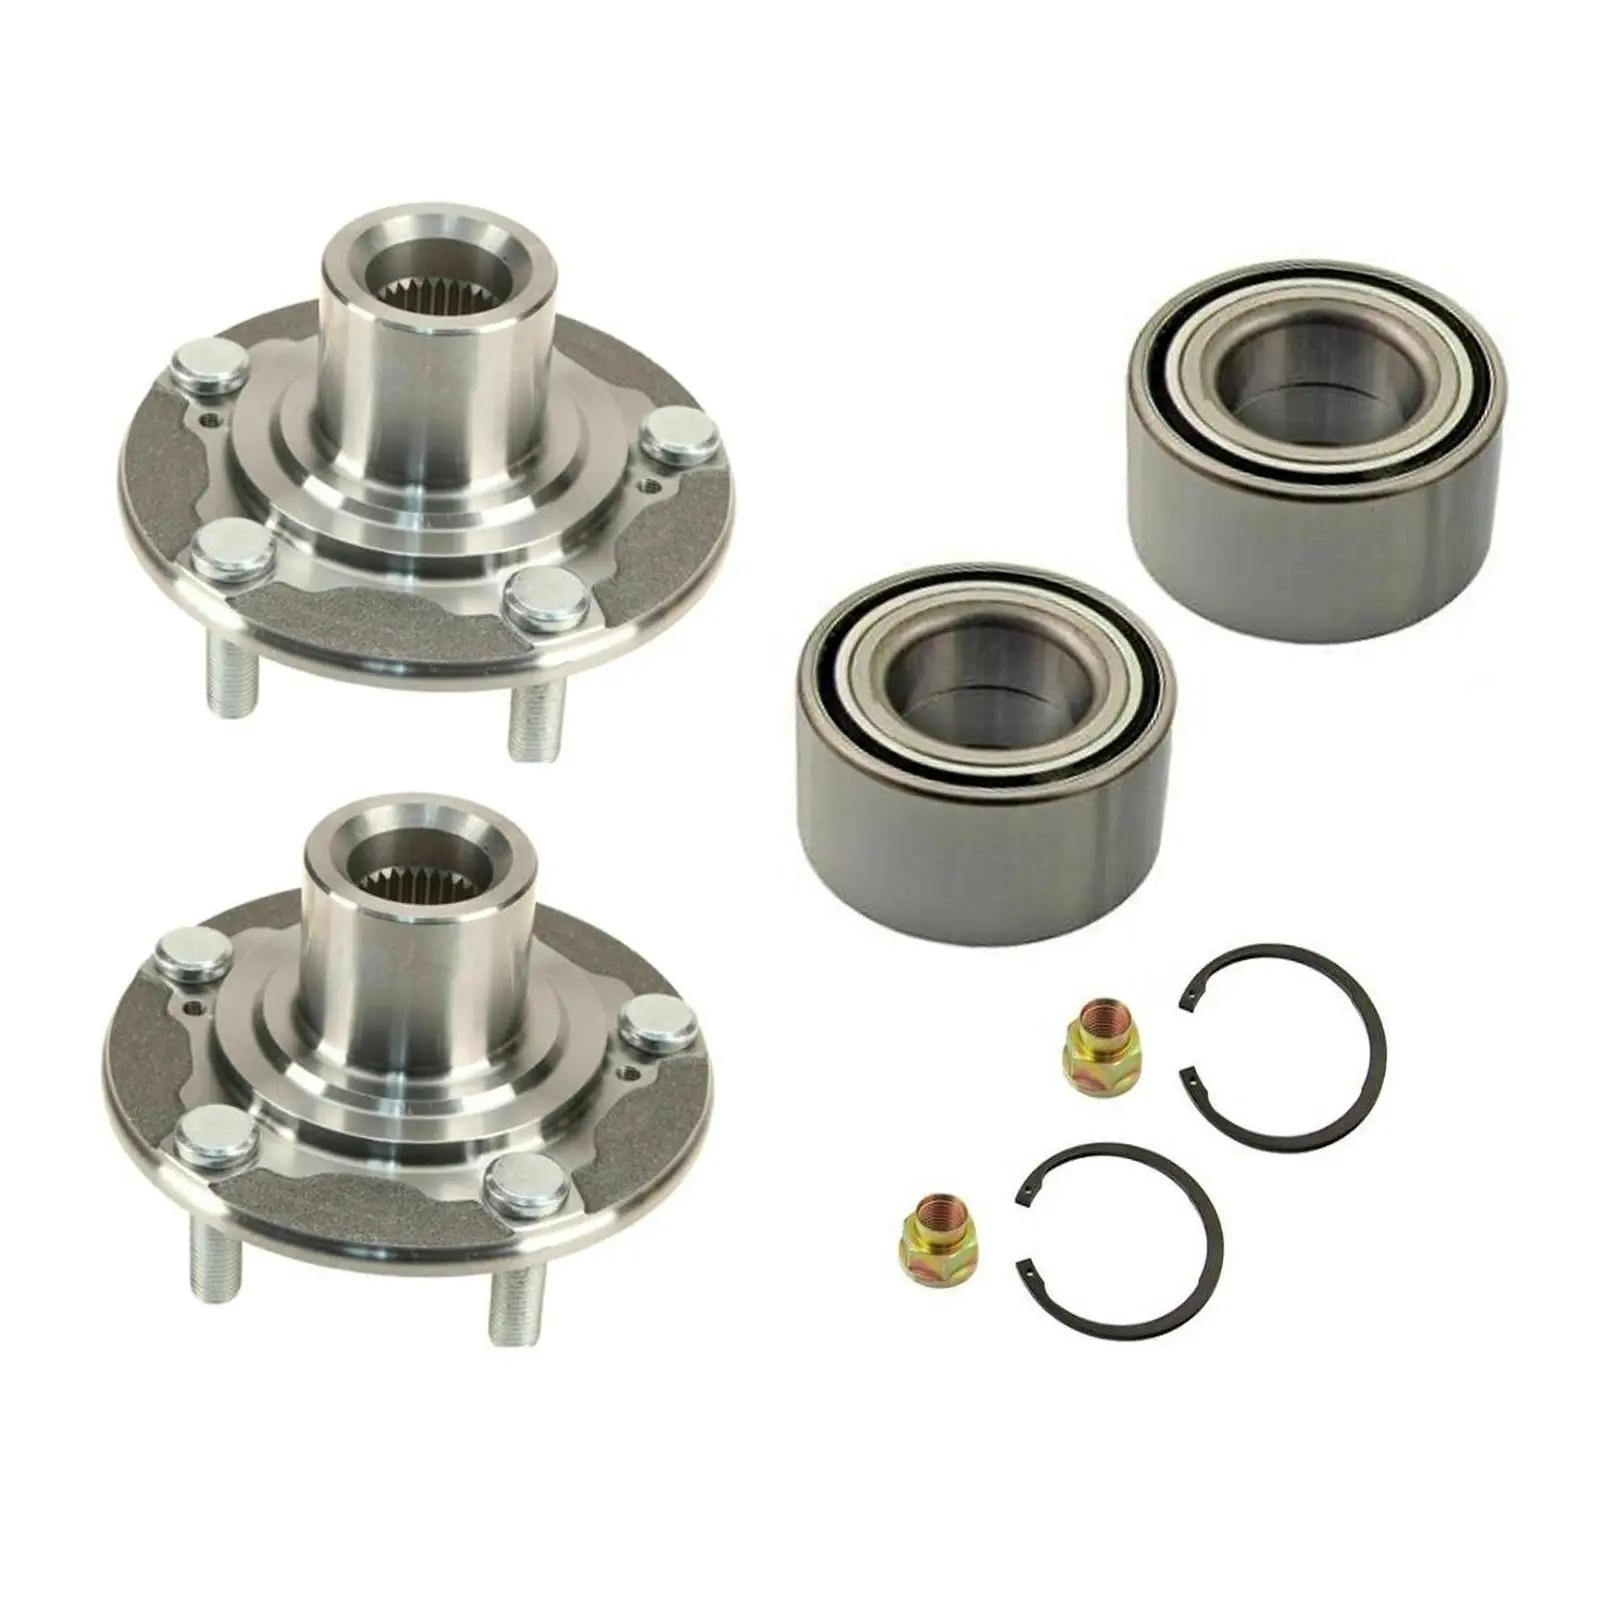 2x Front Wheel Hub and Bearing Repair Kits Replacement Spare Parts Professional Left and Right for Honda Accord 2013-2017